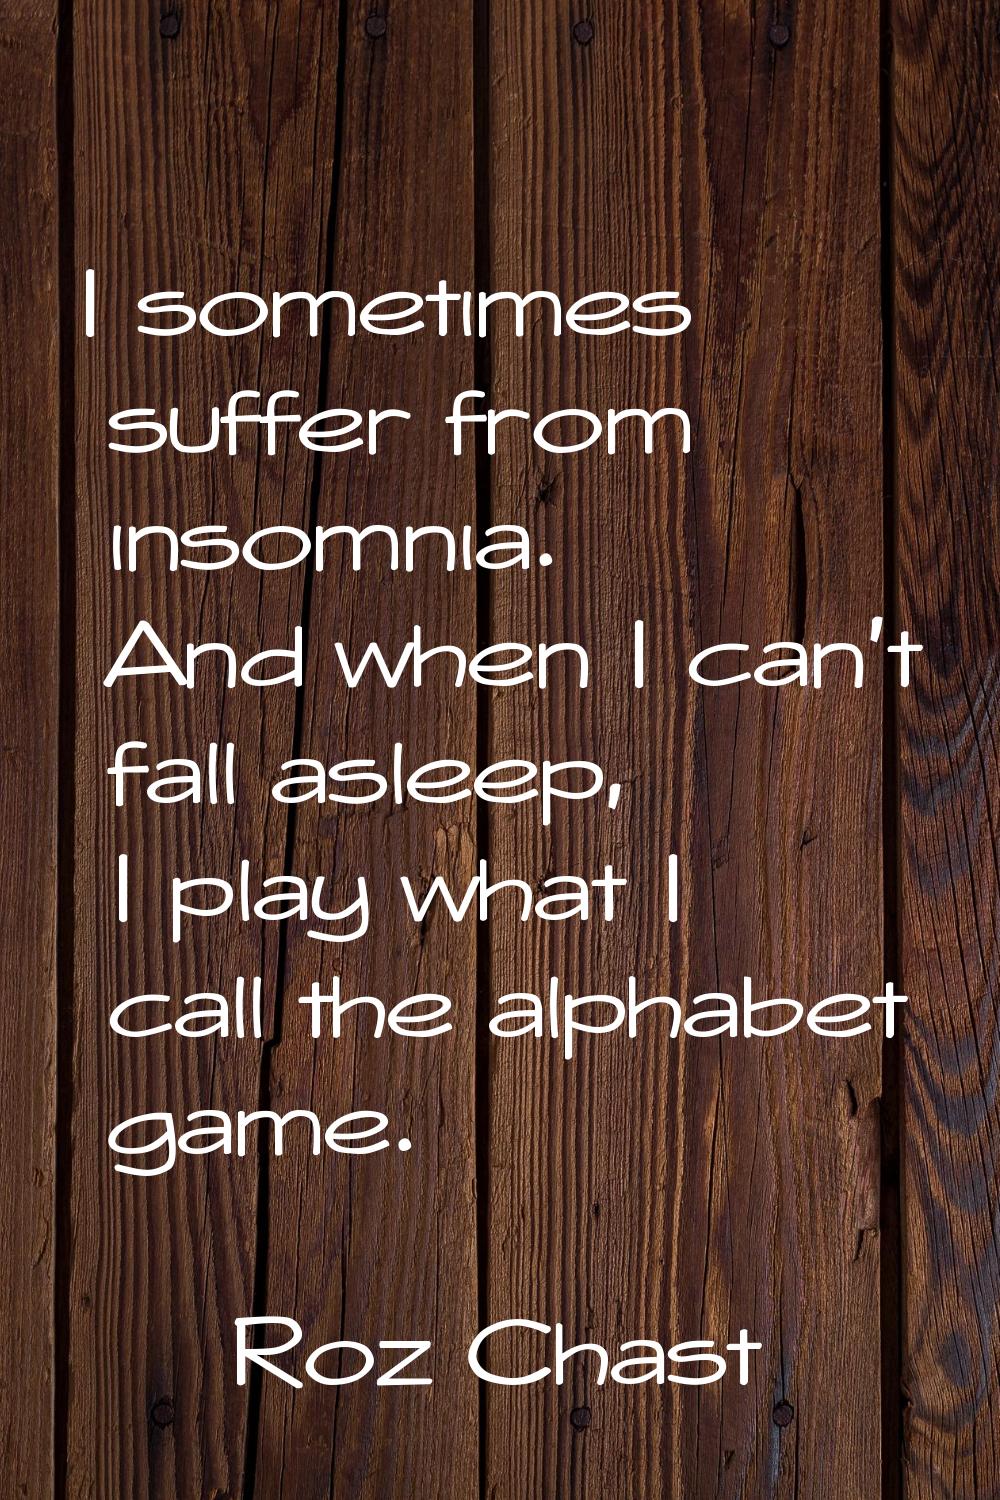 I sometimes suffer from insomnia. And when I can't fall asleep, I play what I call the alphabet gam